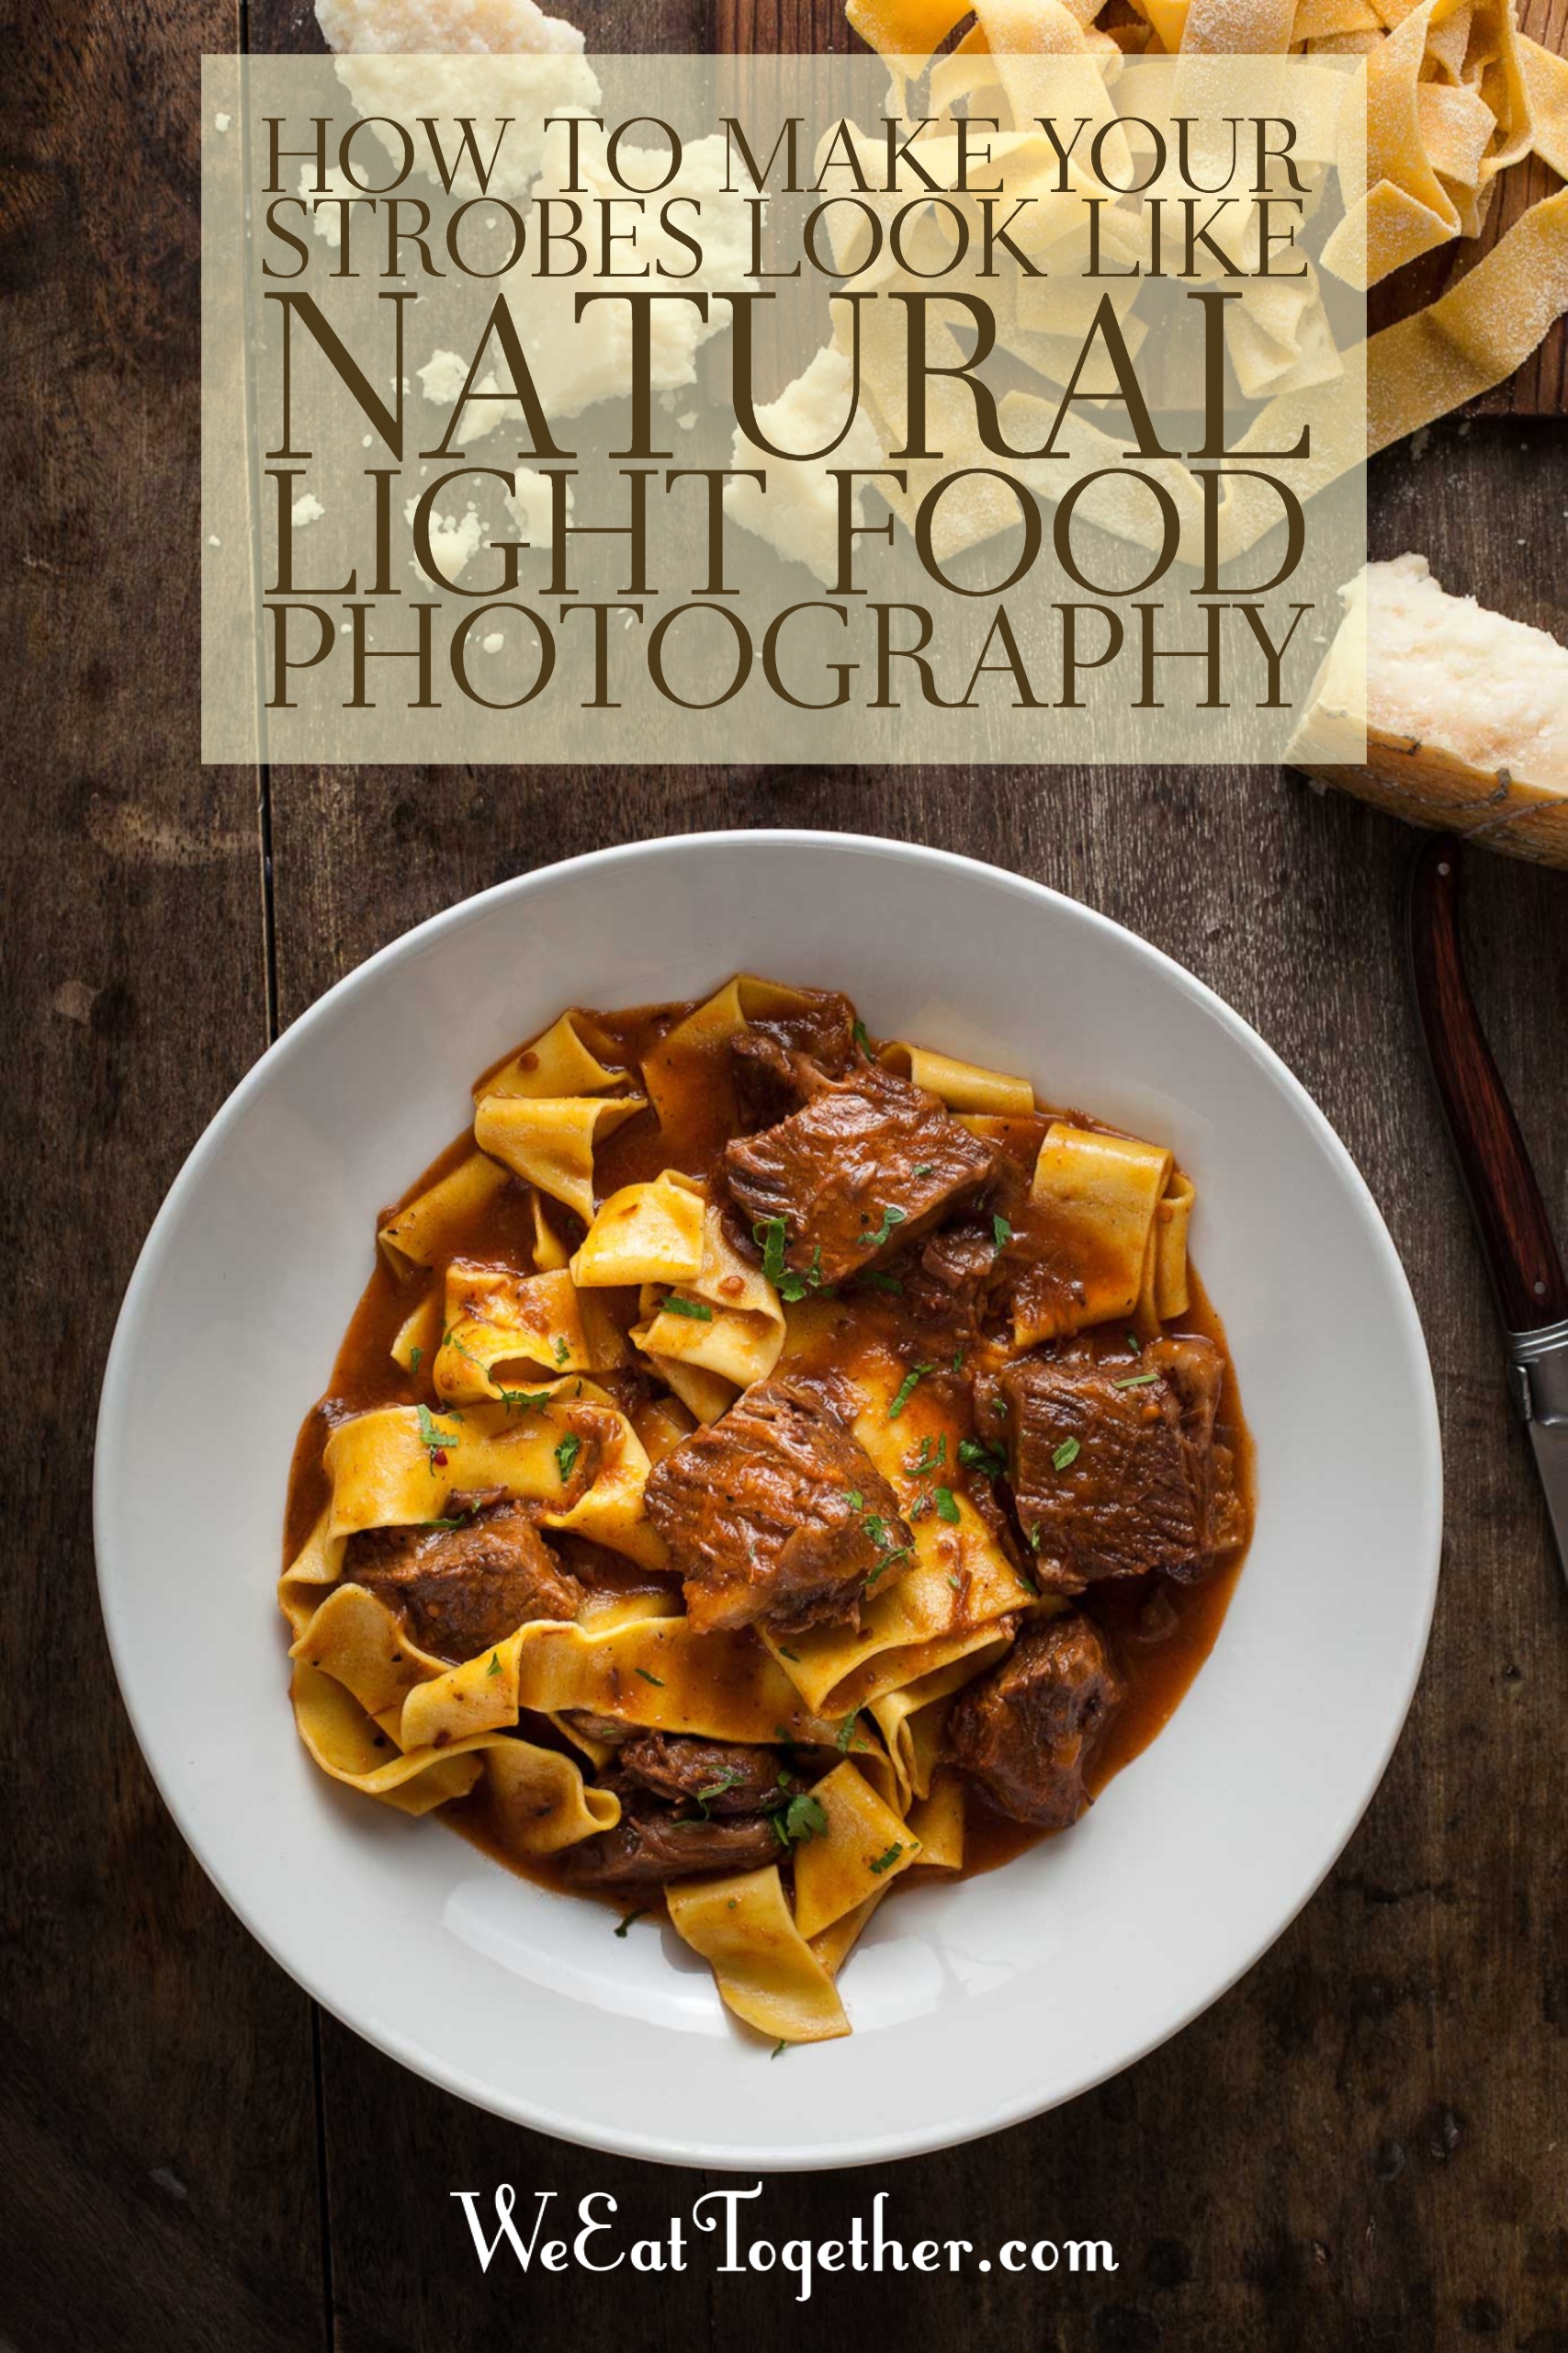 Food Photography Lighting How To Make Artificial Lighting look Natural